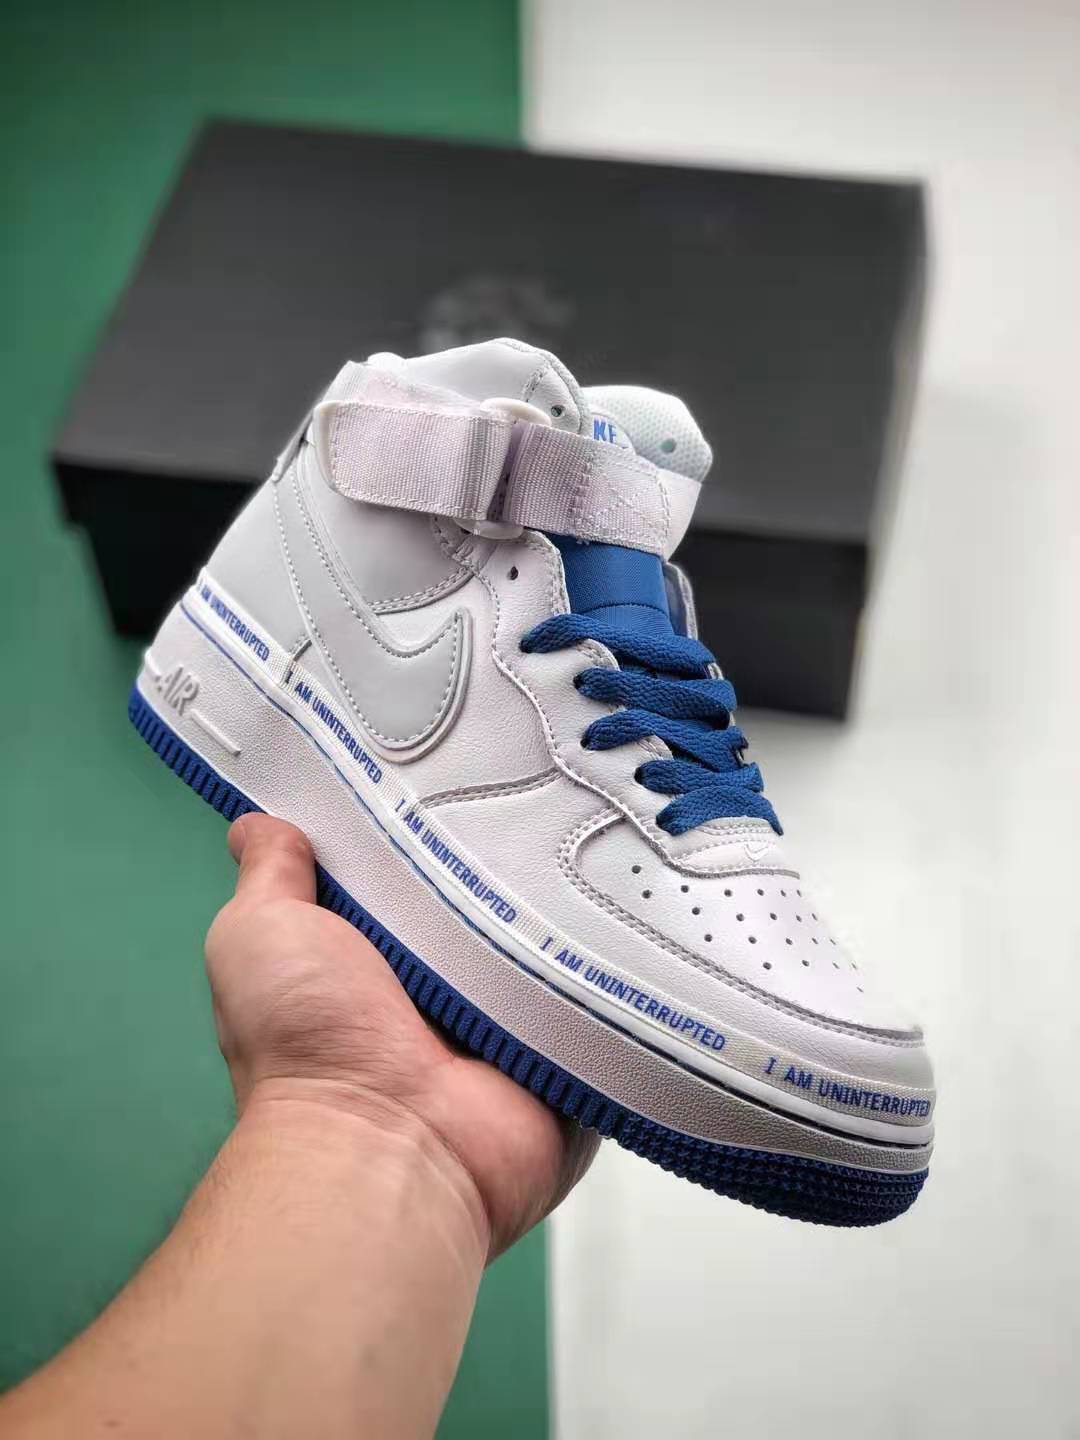 Nike AF1 High MTAA QS Uninterrupted White Blue CQ0494-600 - Premium Edition at Exclusive Prices!